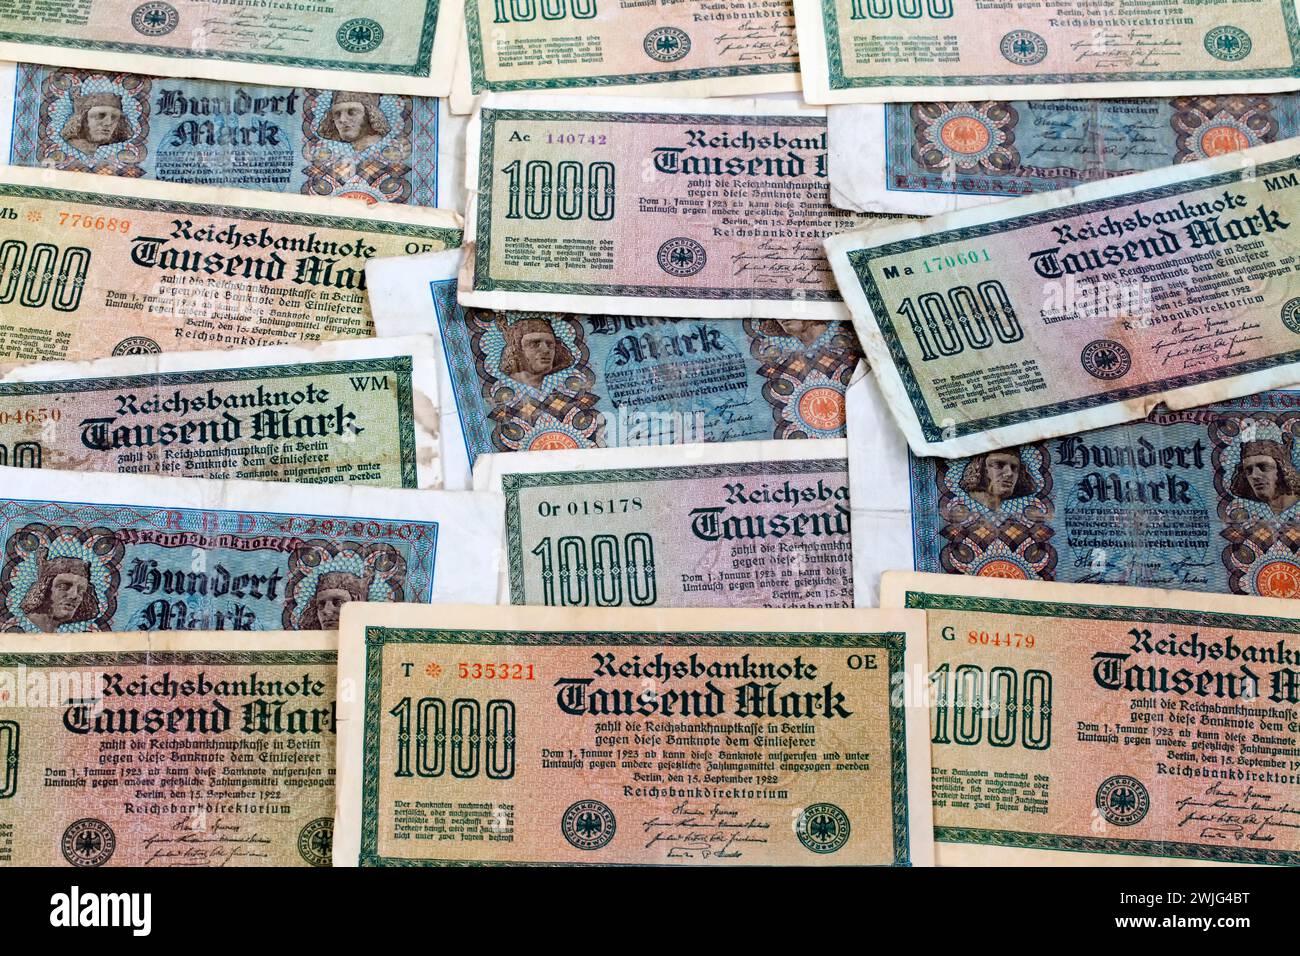 Reichsbank banknotes, Germany, 1922, Europe Stock Photo